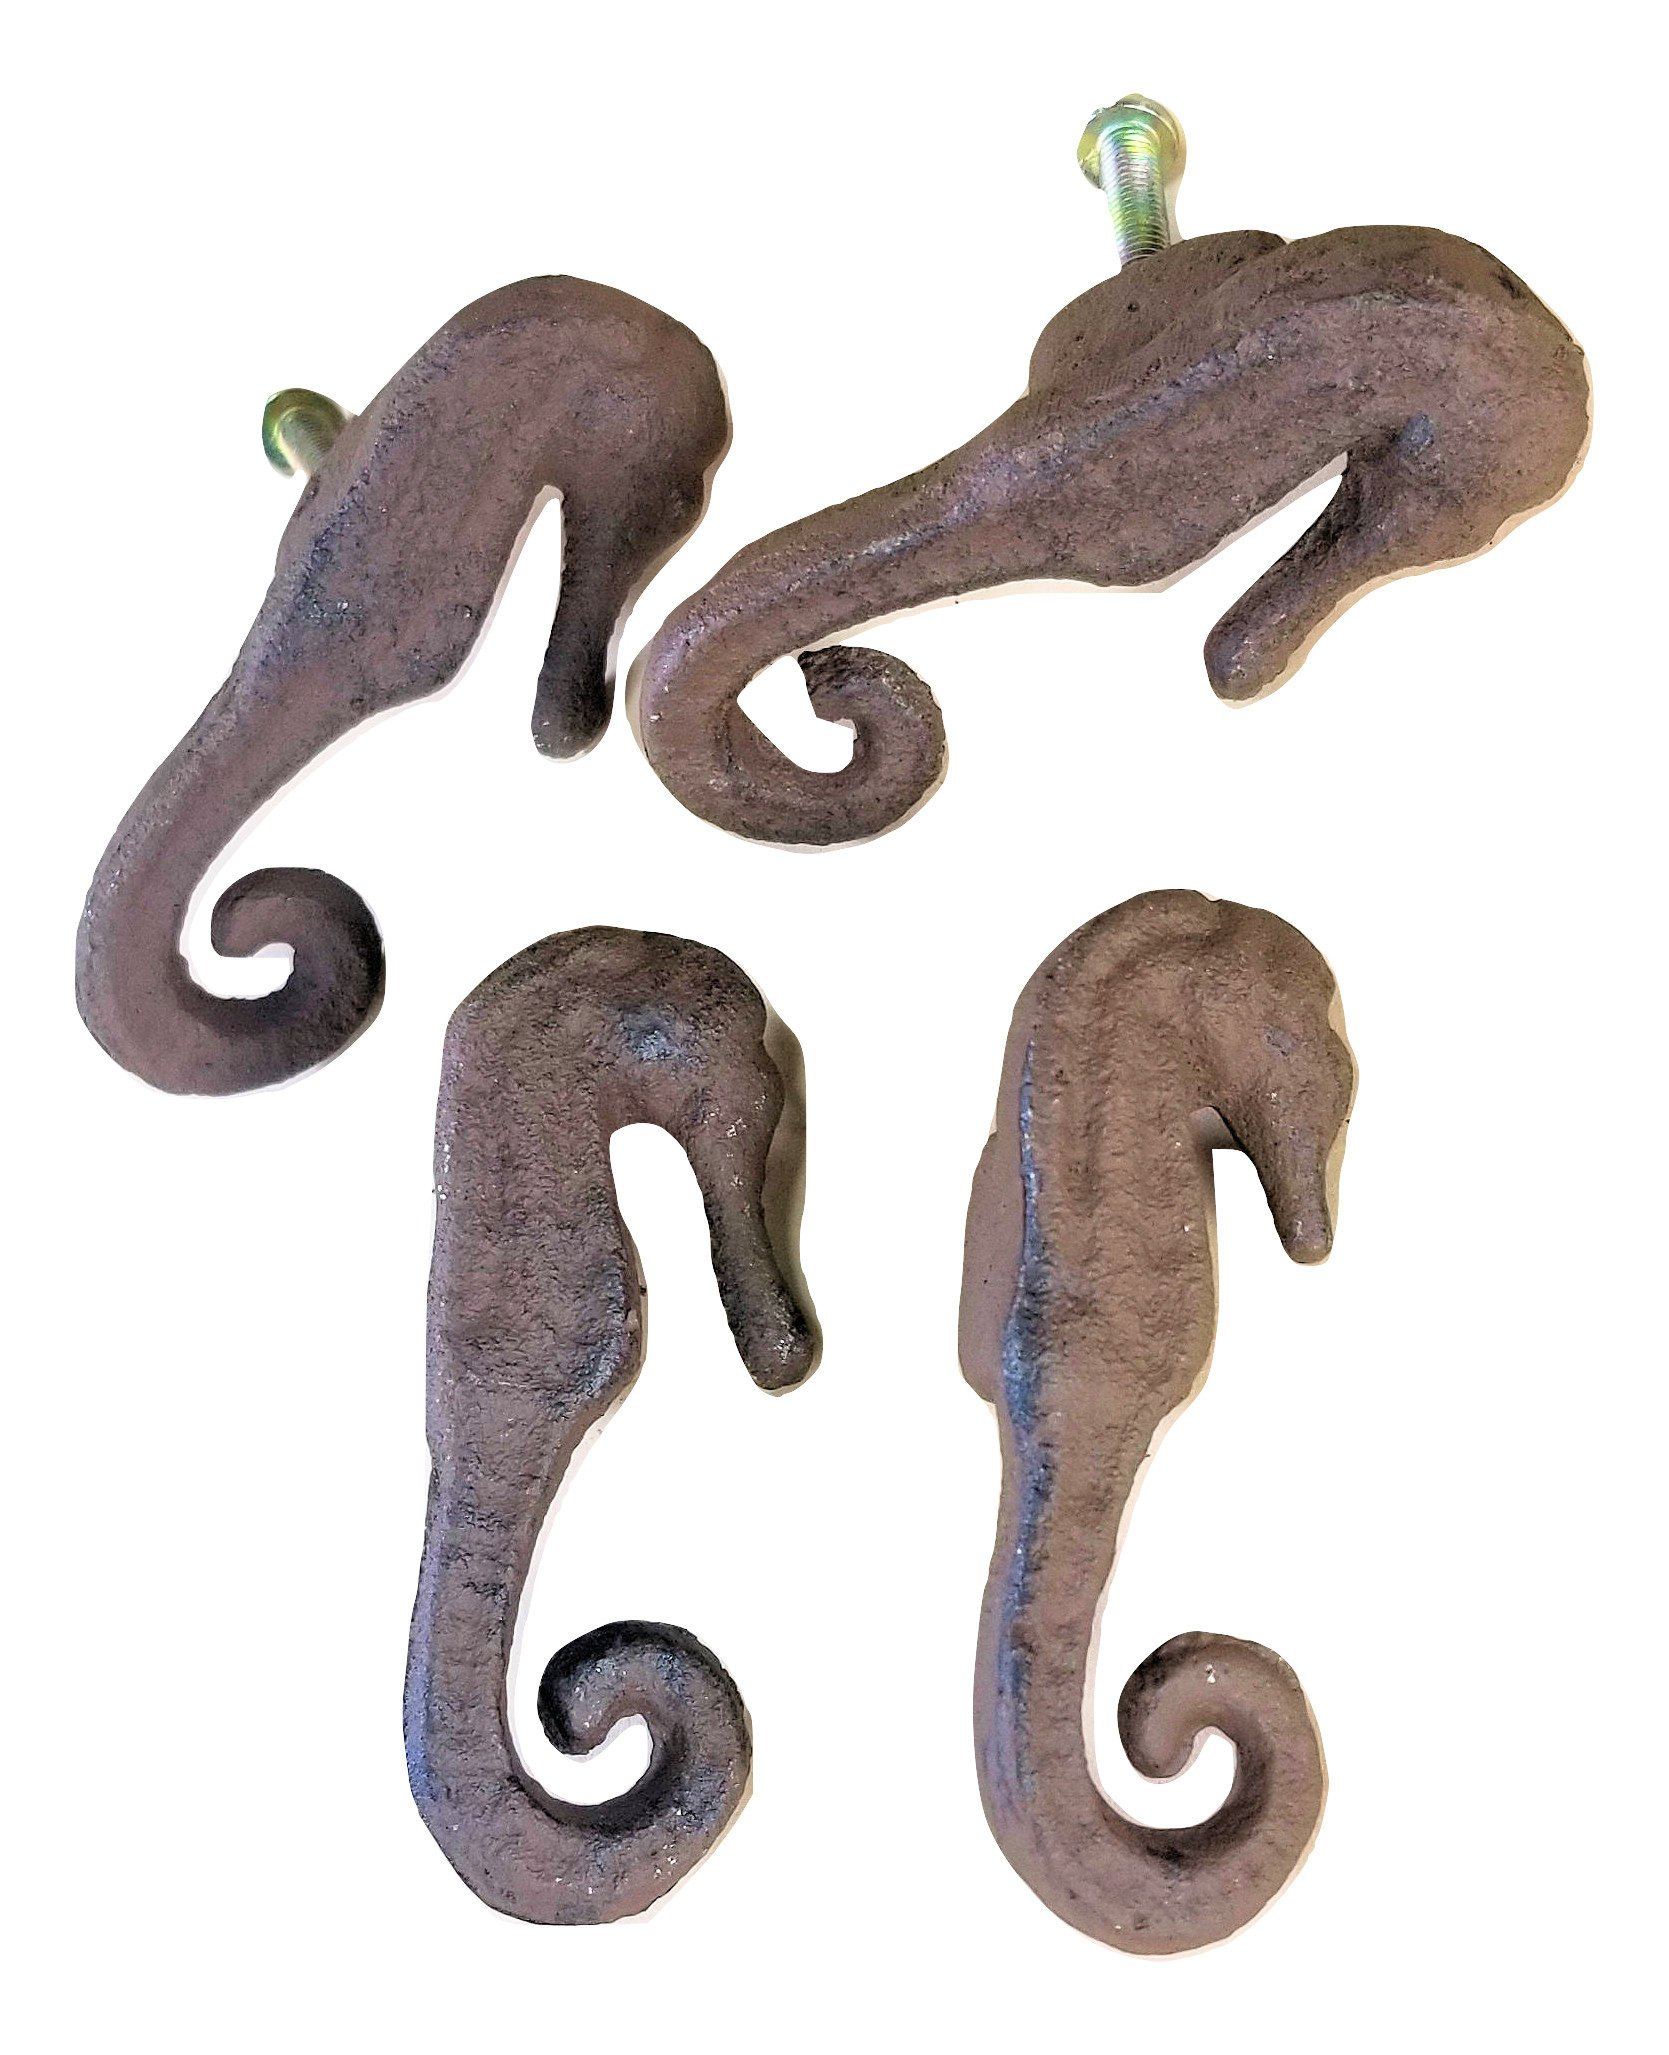 4 Cast Iron Seahorse Knobs For Cabinets And Drawers Carvers Olde